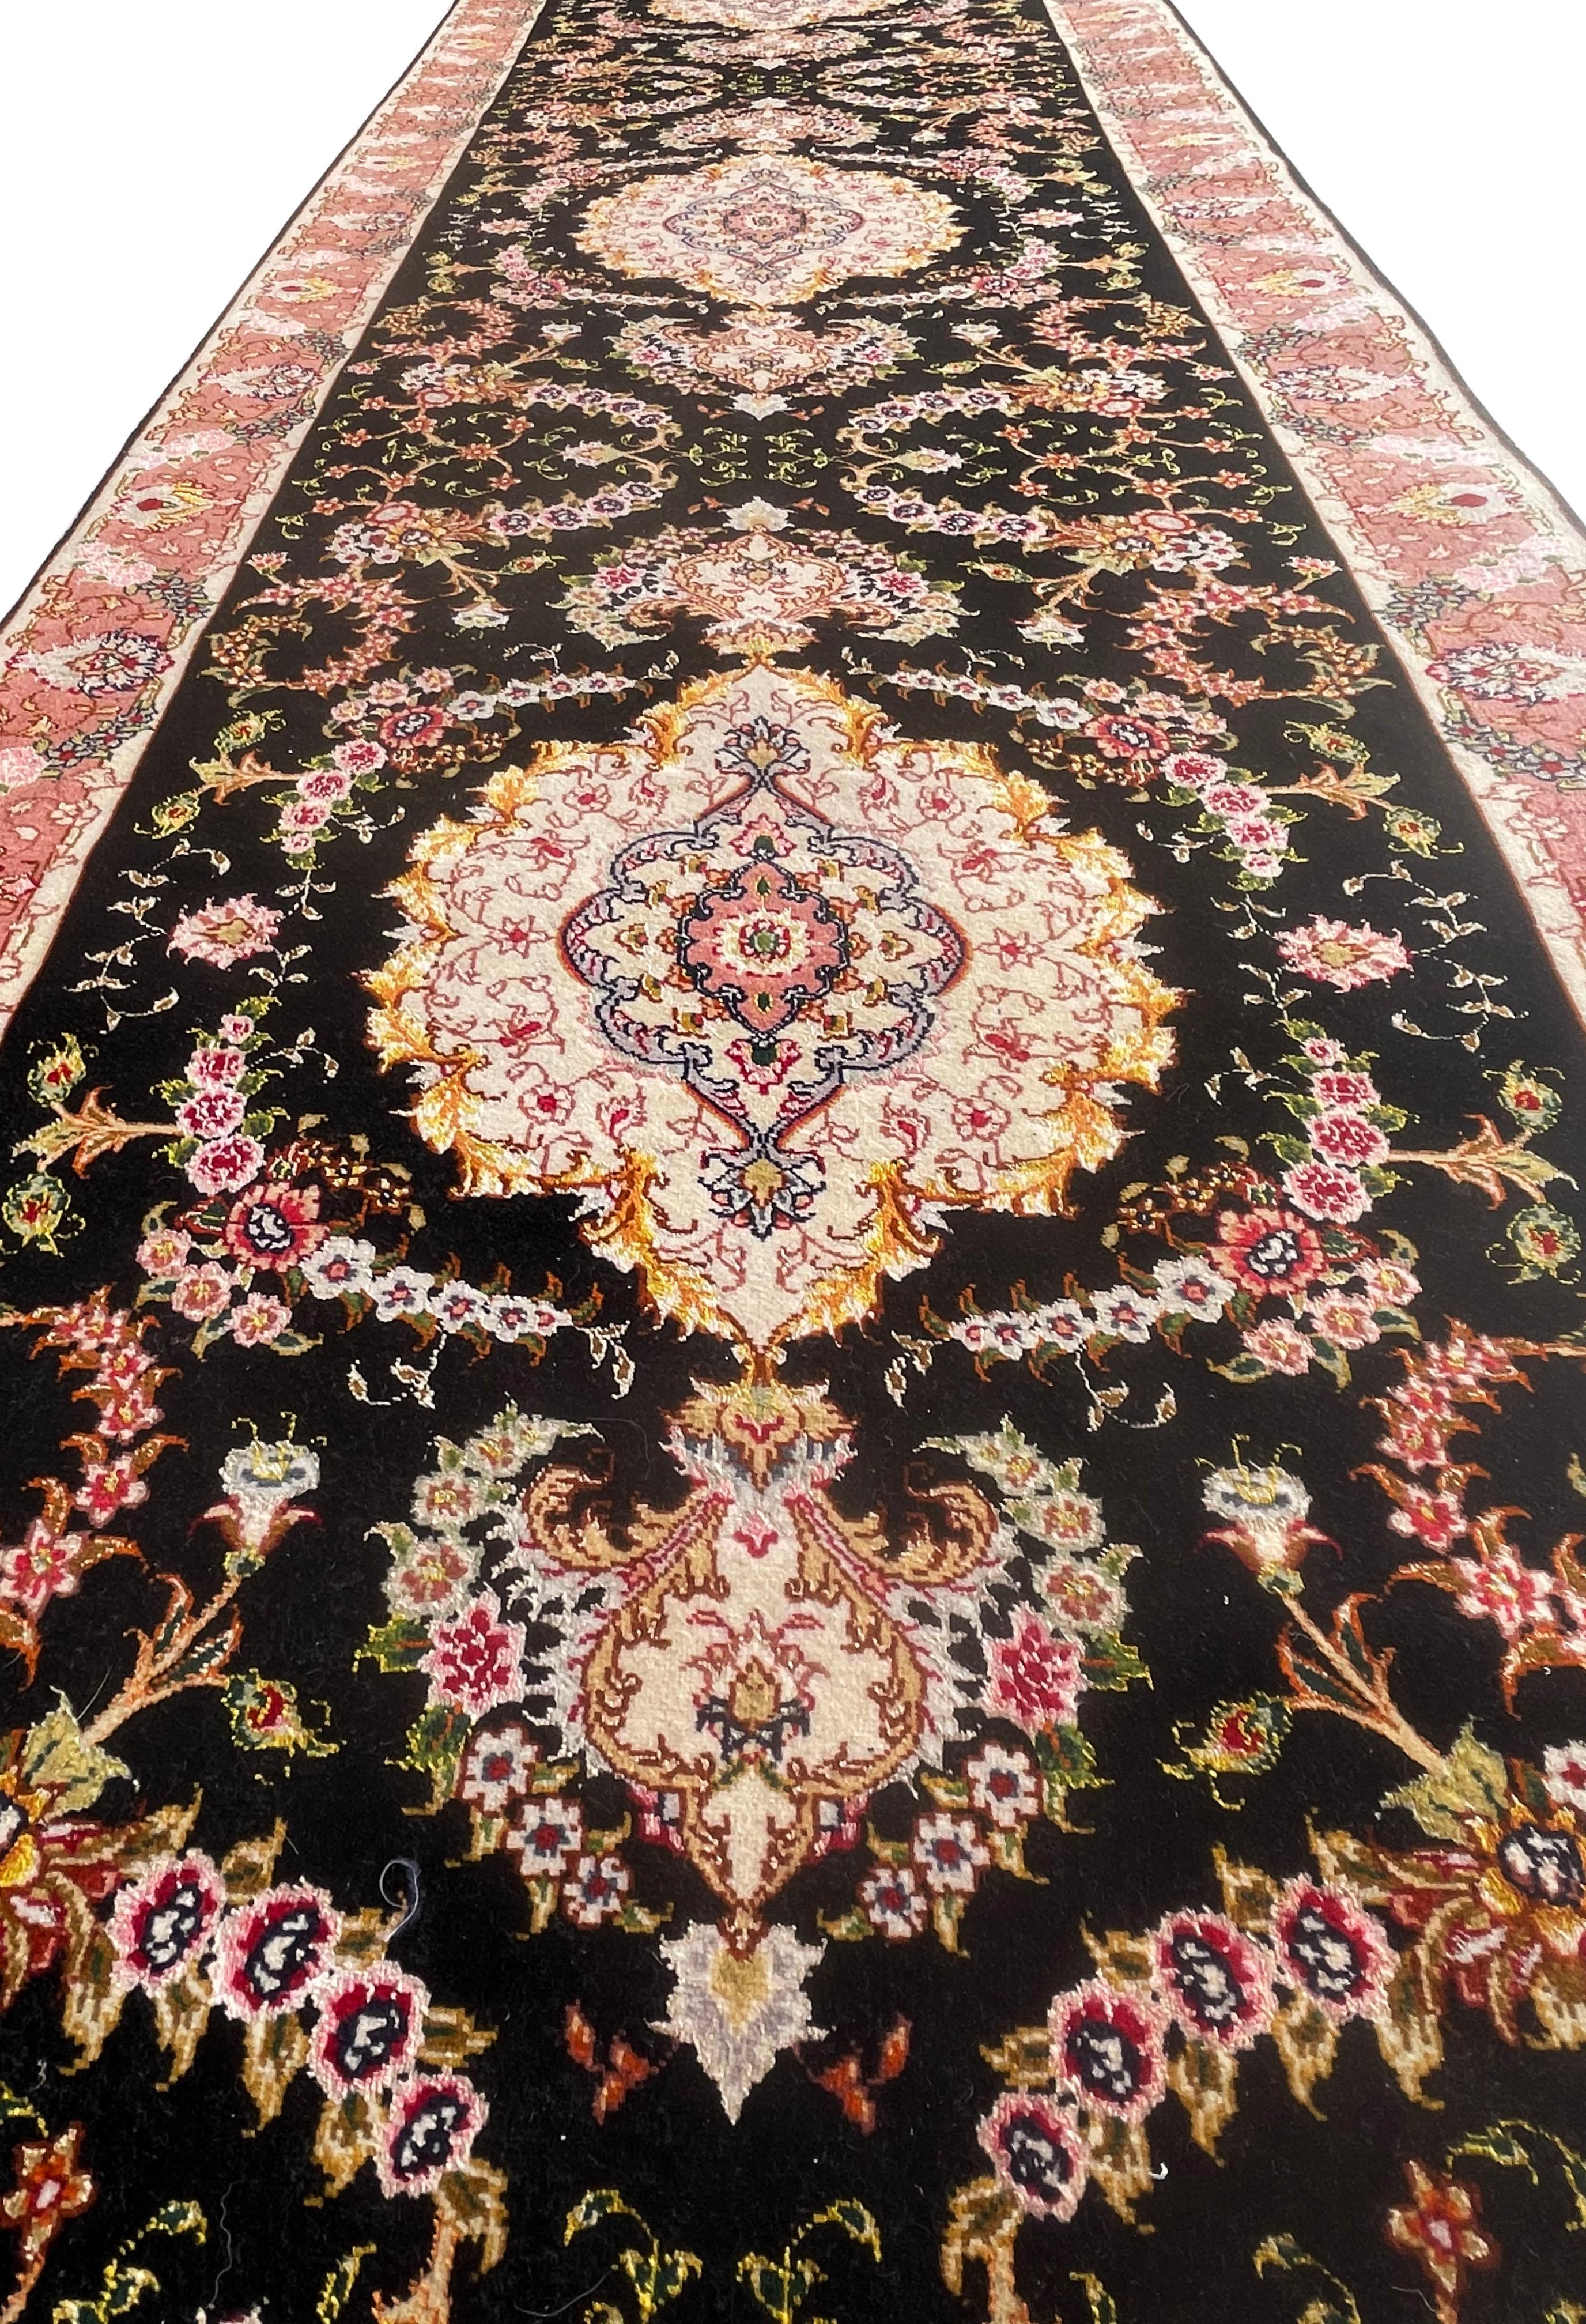 Authentic Persian Hand Knotted Repeated Medallion Floral Tabriz Black Runner Rug For Sale 2